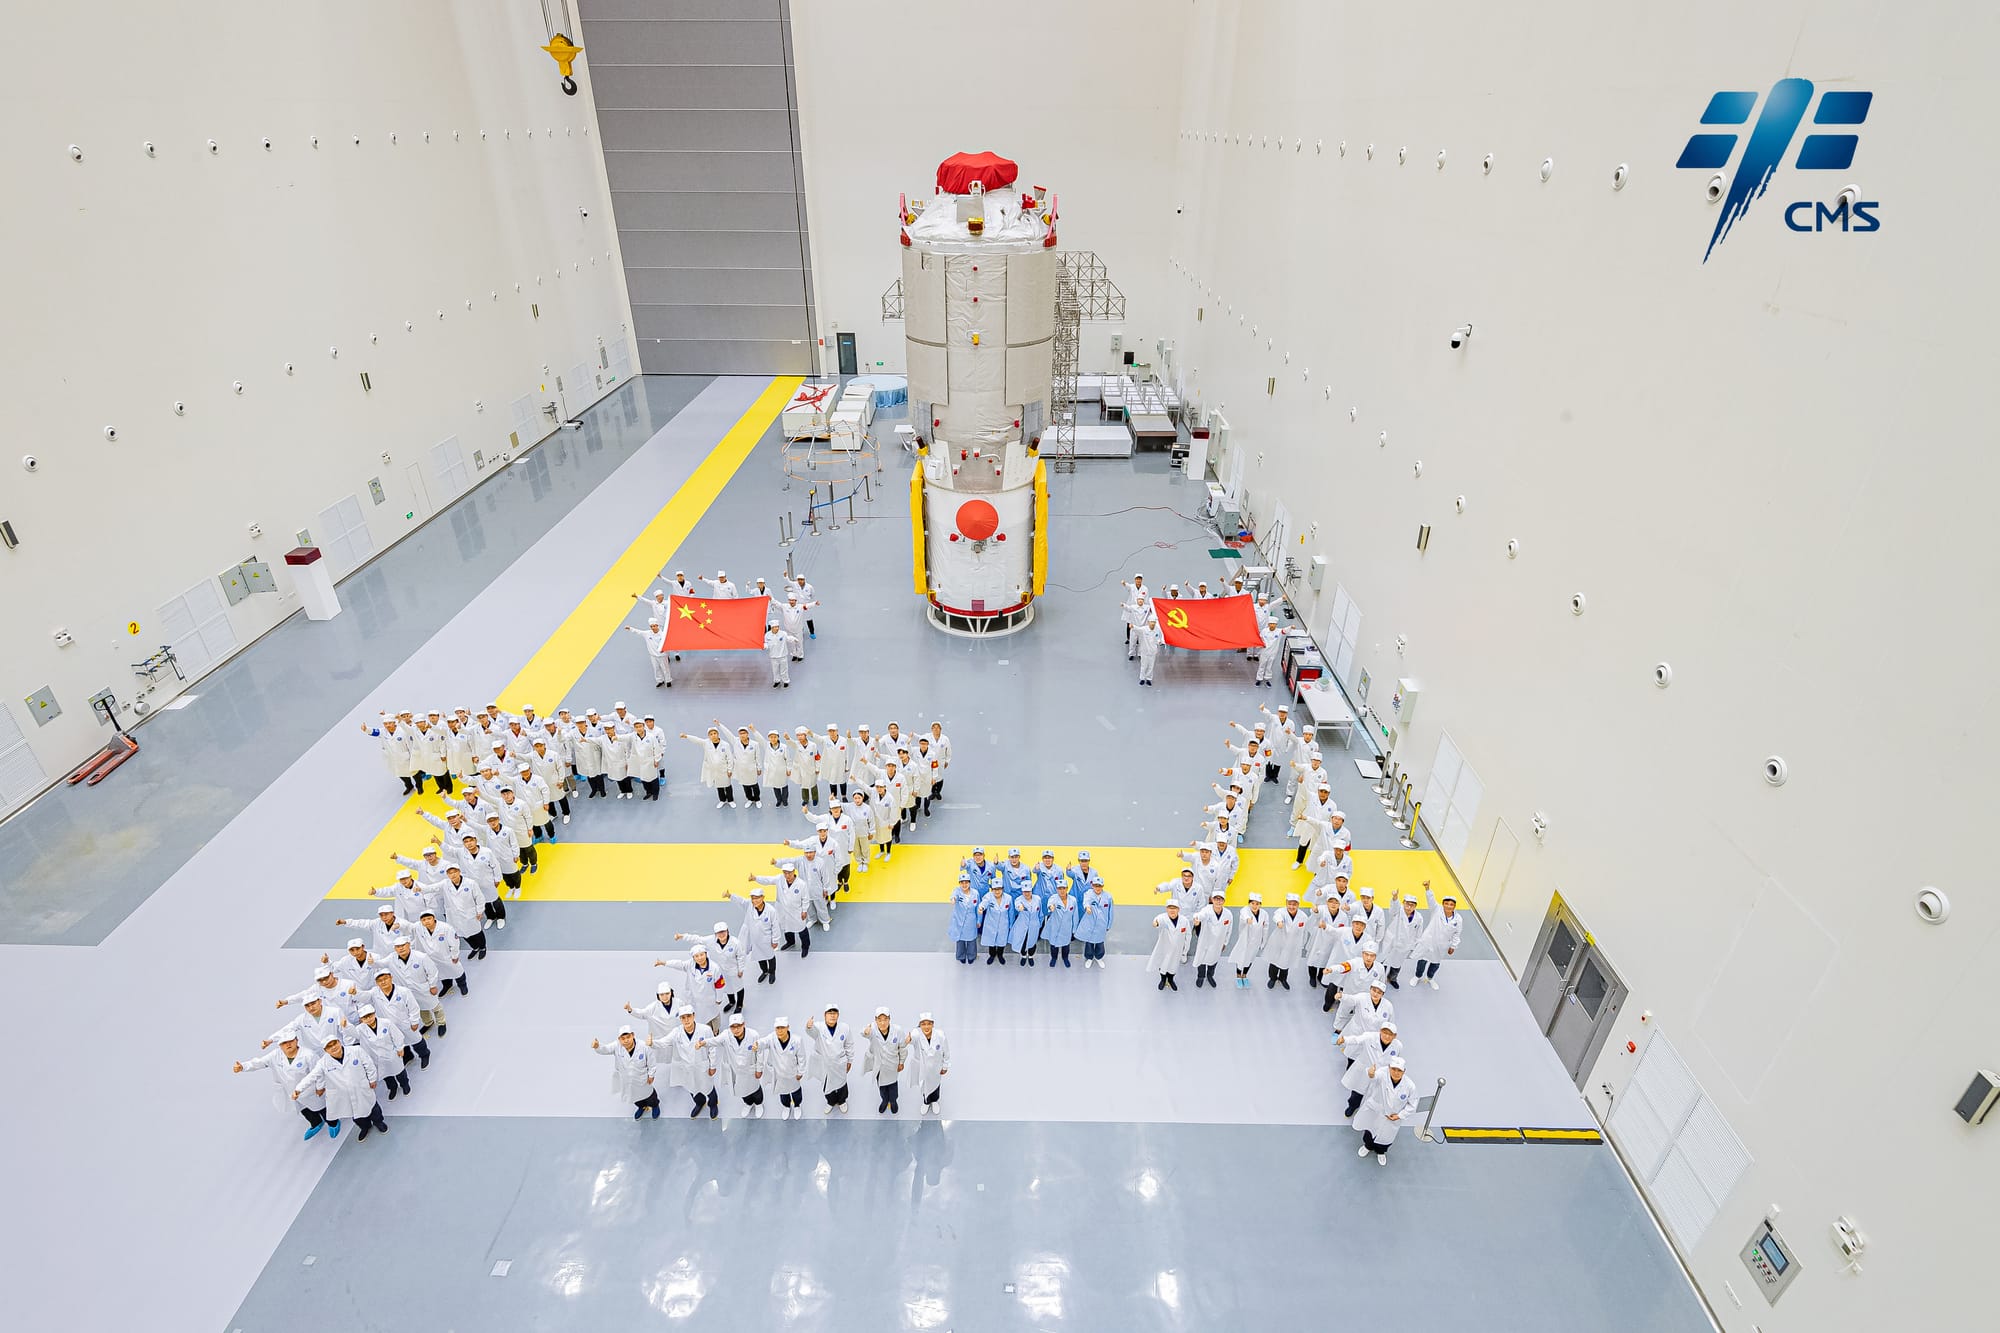 Tianzhou-4 and teams of engineers prior to integration onto a Long March 7 rocket. ©China Manned Space Agency